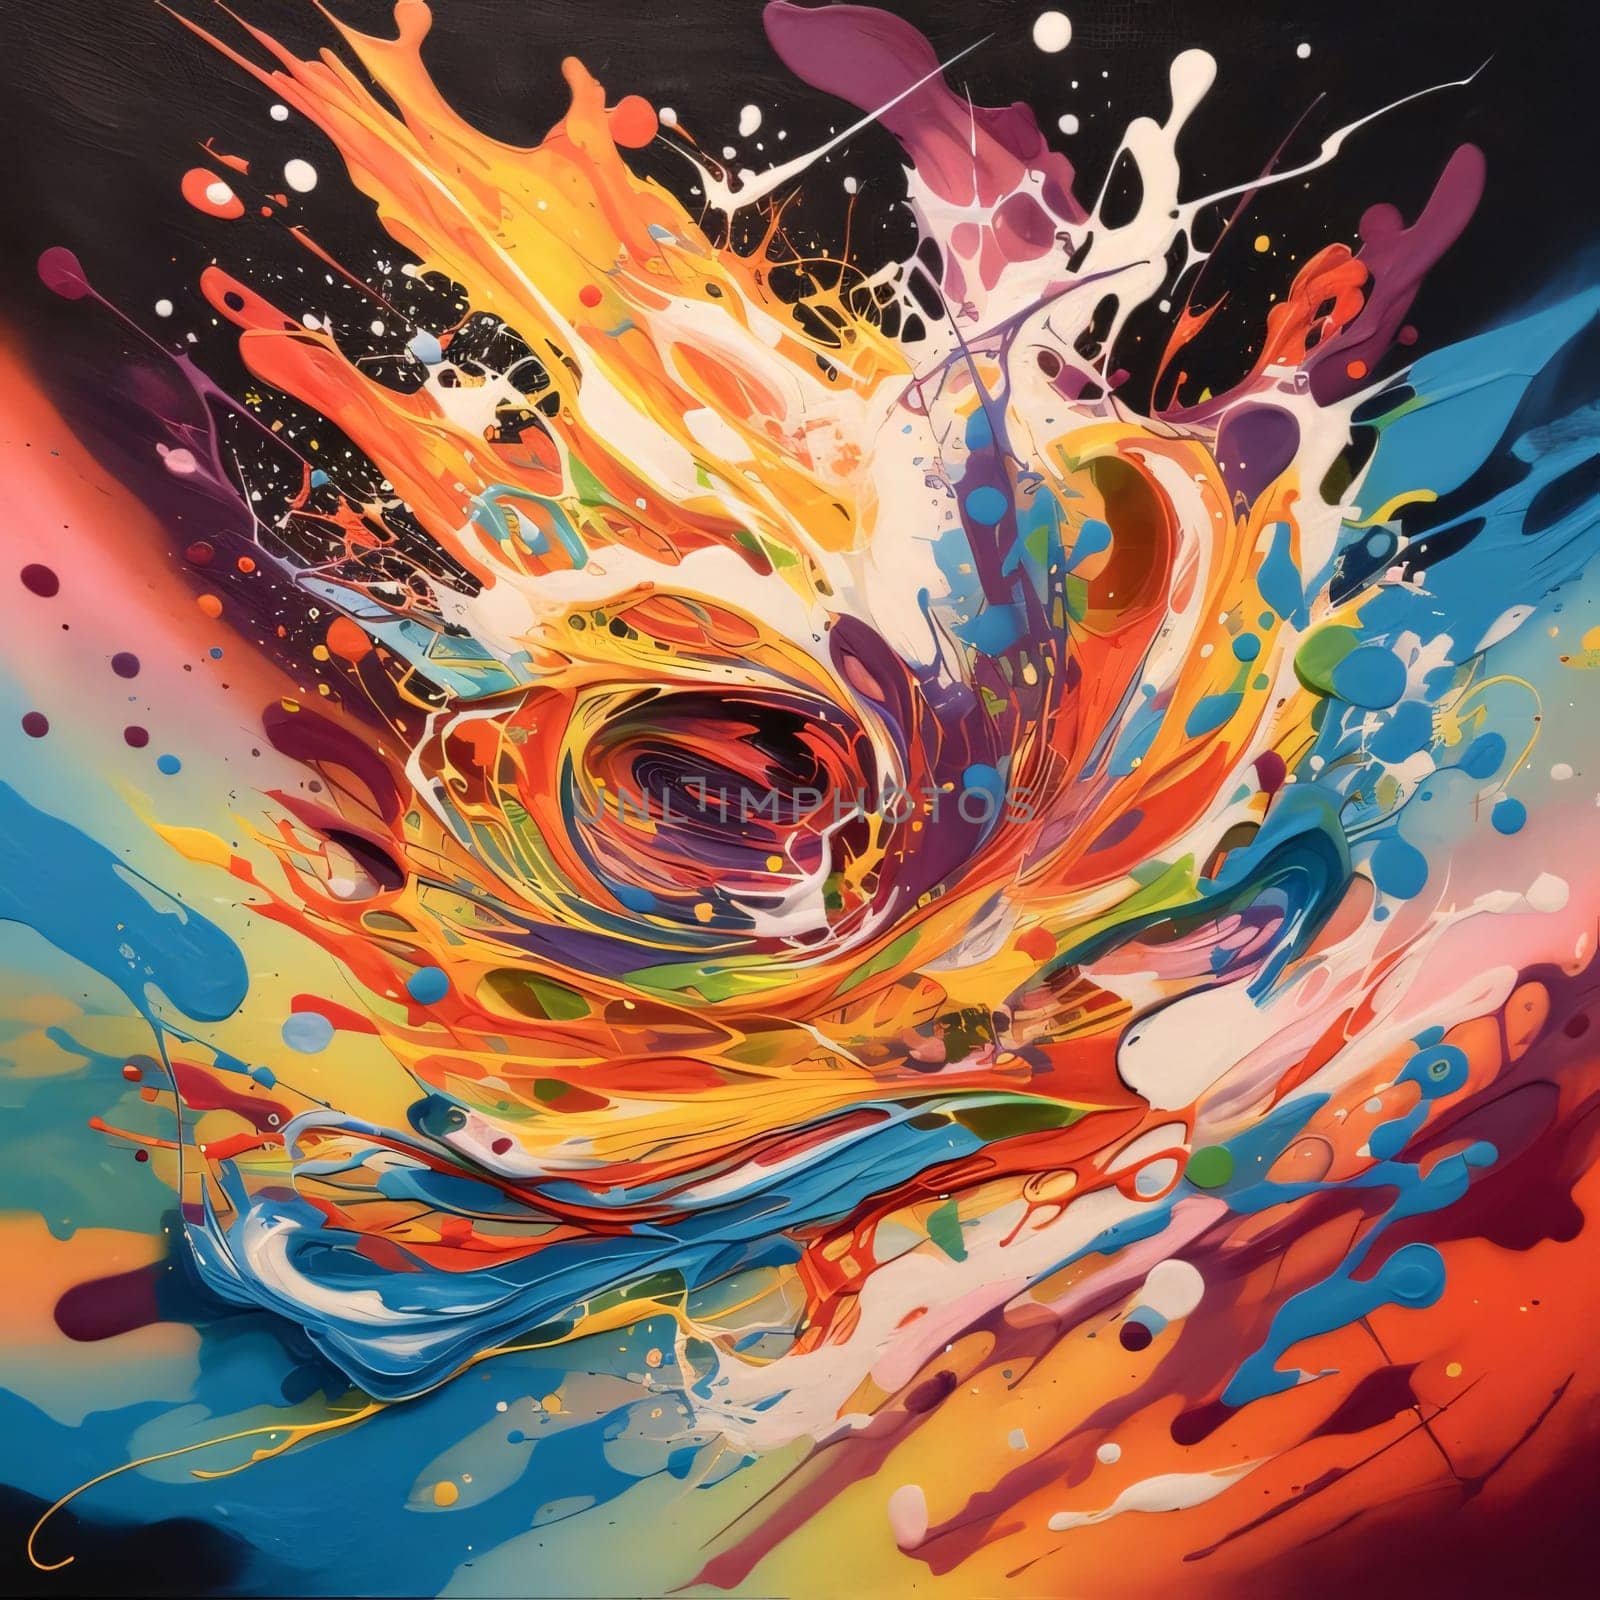 Abstract background design: abstract background with colorful splashes of paint on a black background